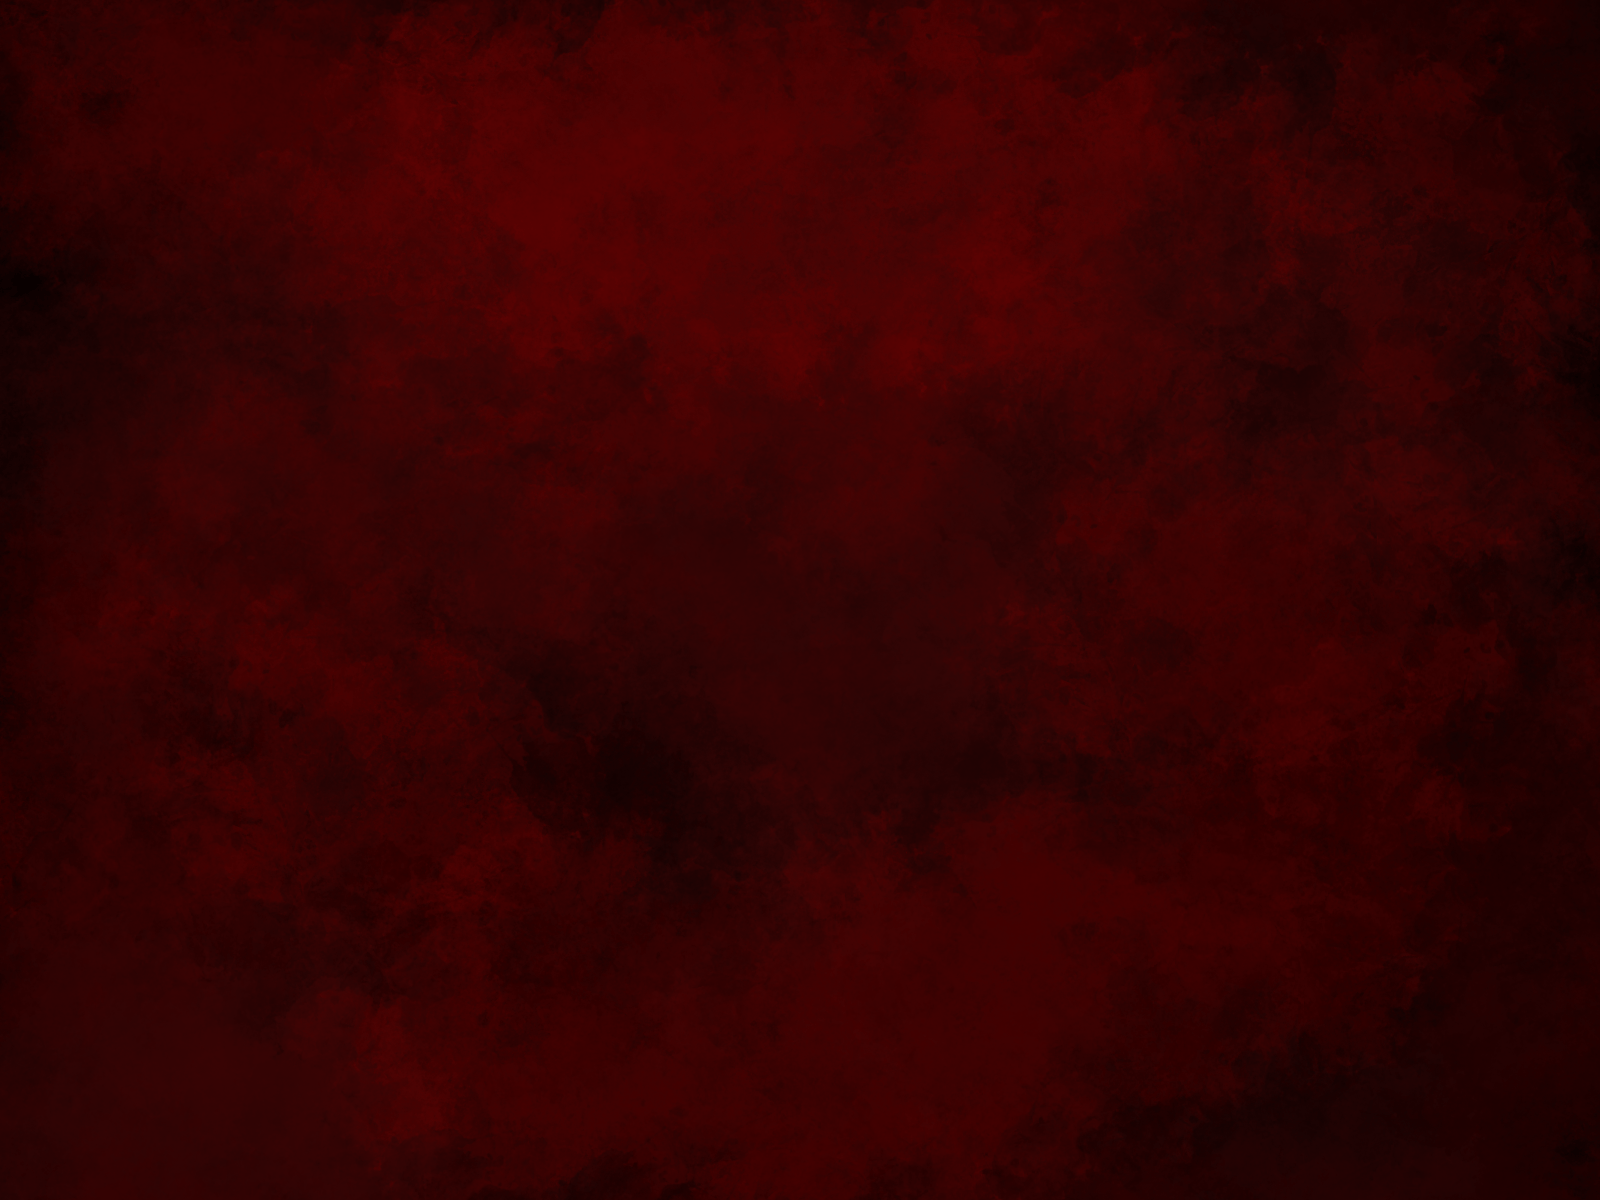 A red background with some black spots - Crimson